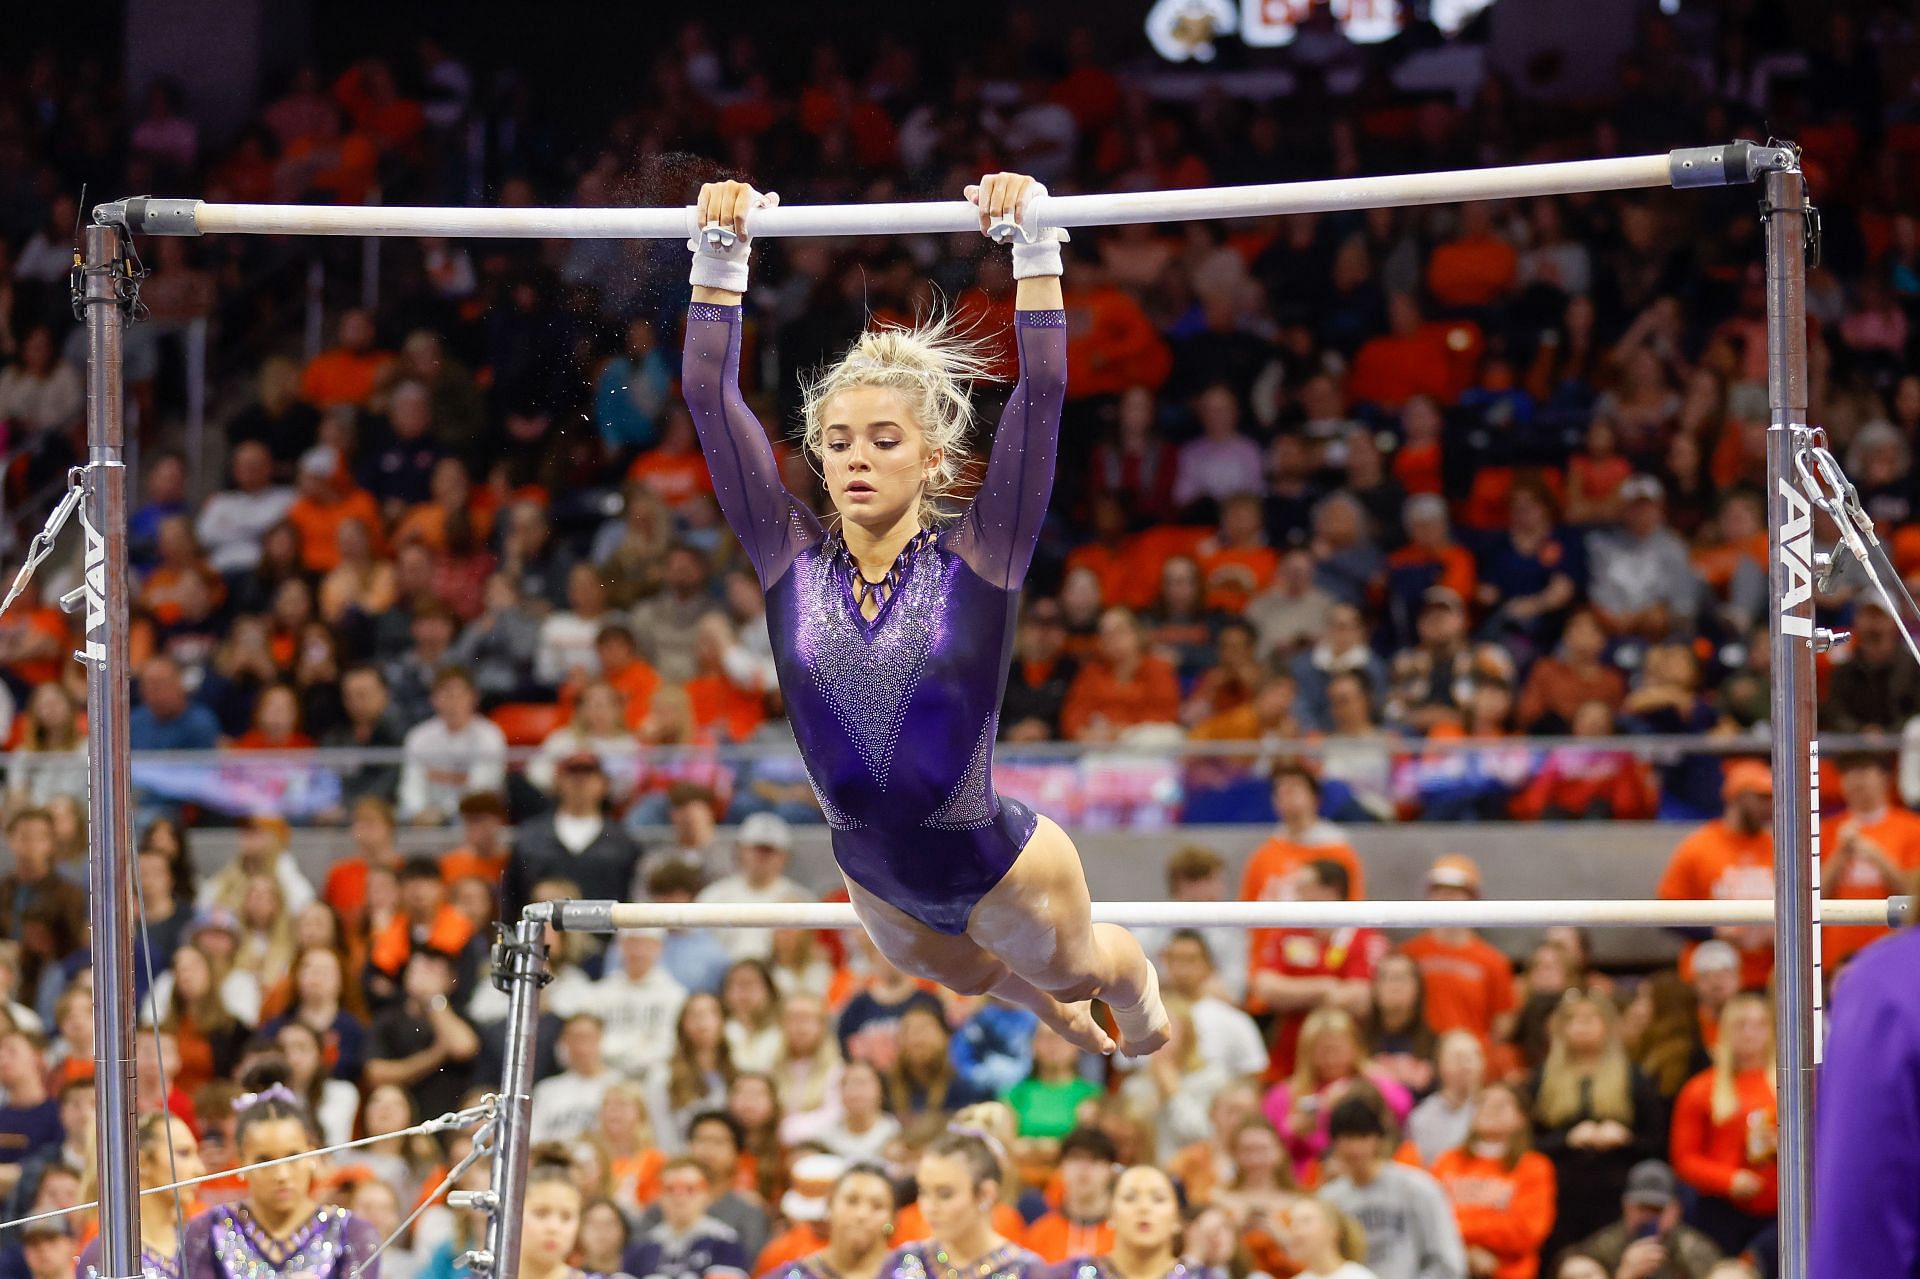 Olivia Dunne of LSU warms up on the uneven bars during a gymnastics meet against Auburn at Neville Arena on February 10, 2023 in Auburn, Alabama. (Photo by Stew Milne/Getty Images)